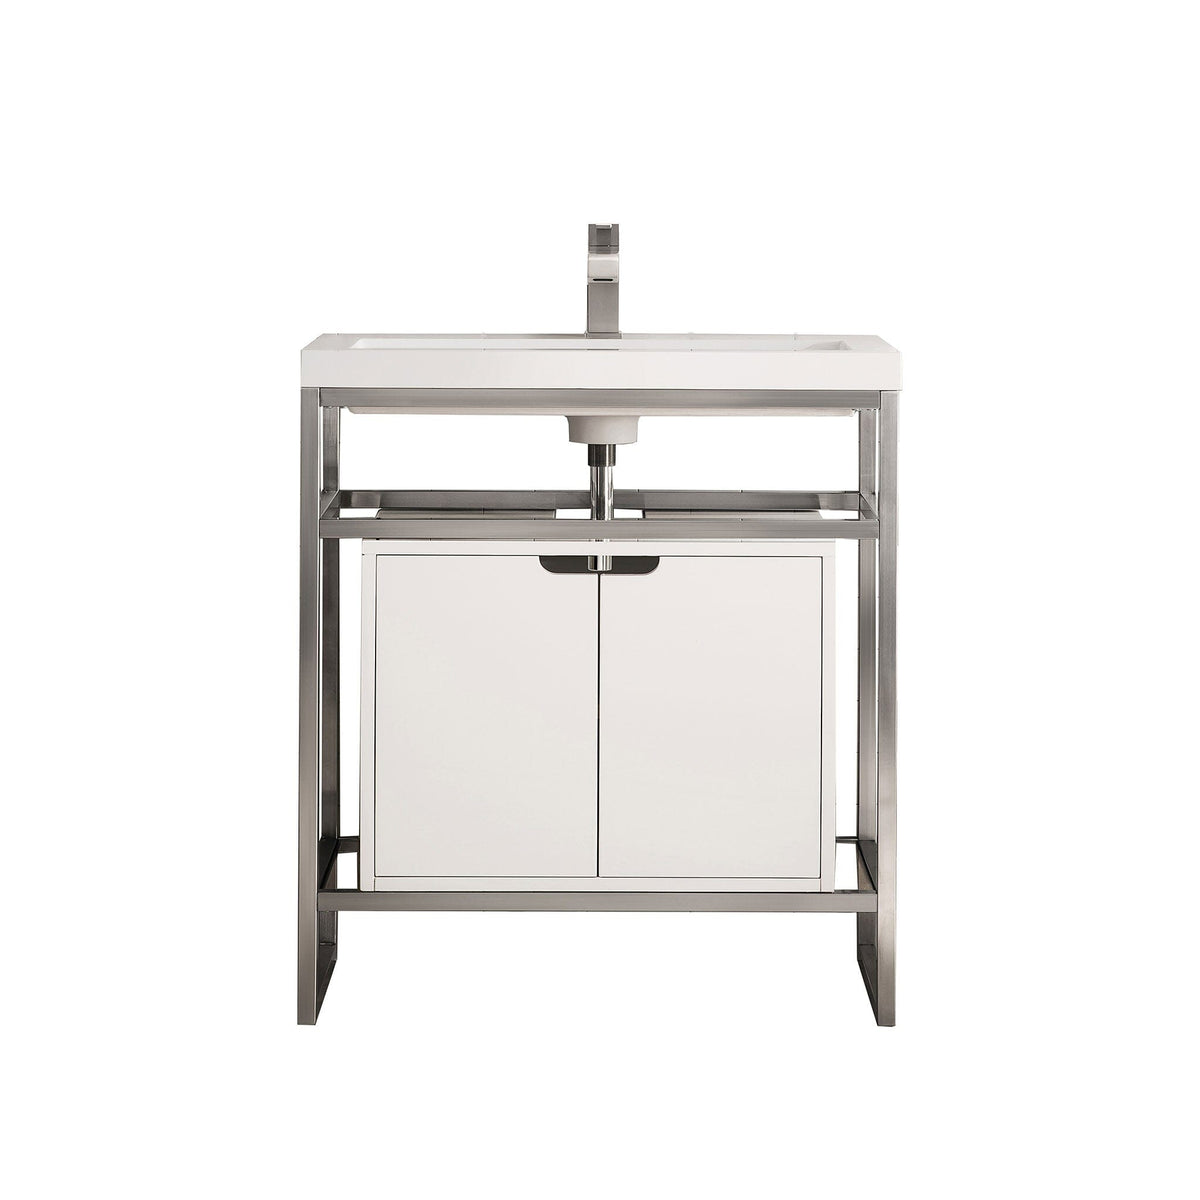 31.5" Boston Single Sink Console, Brushed Nickel w/ Storage Cabinet, White Glossy Resin Countertop